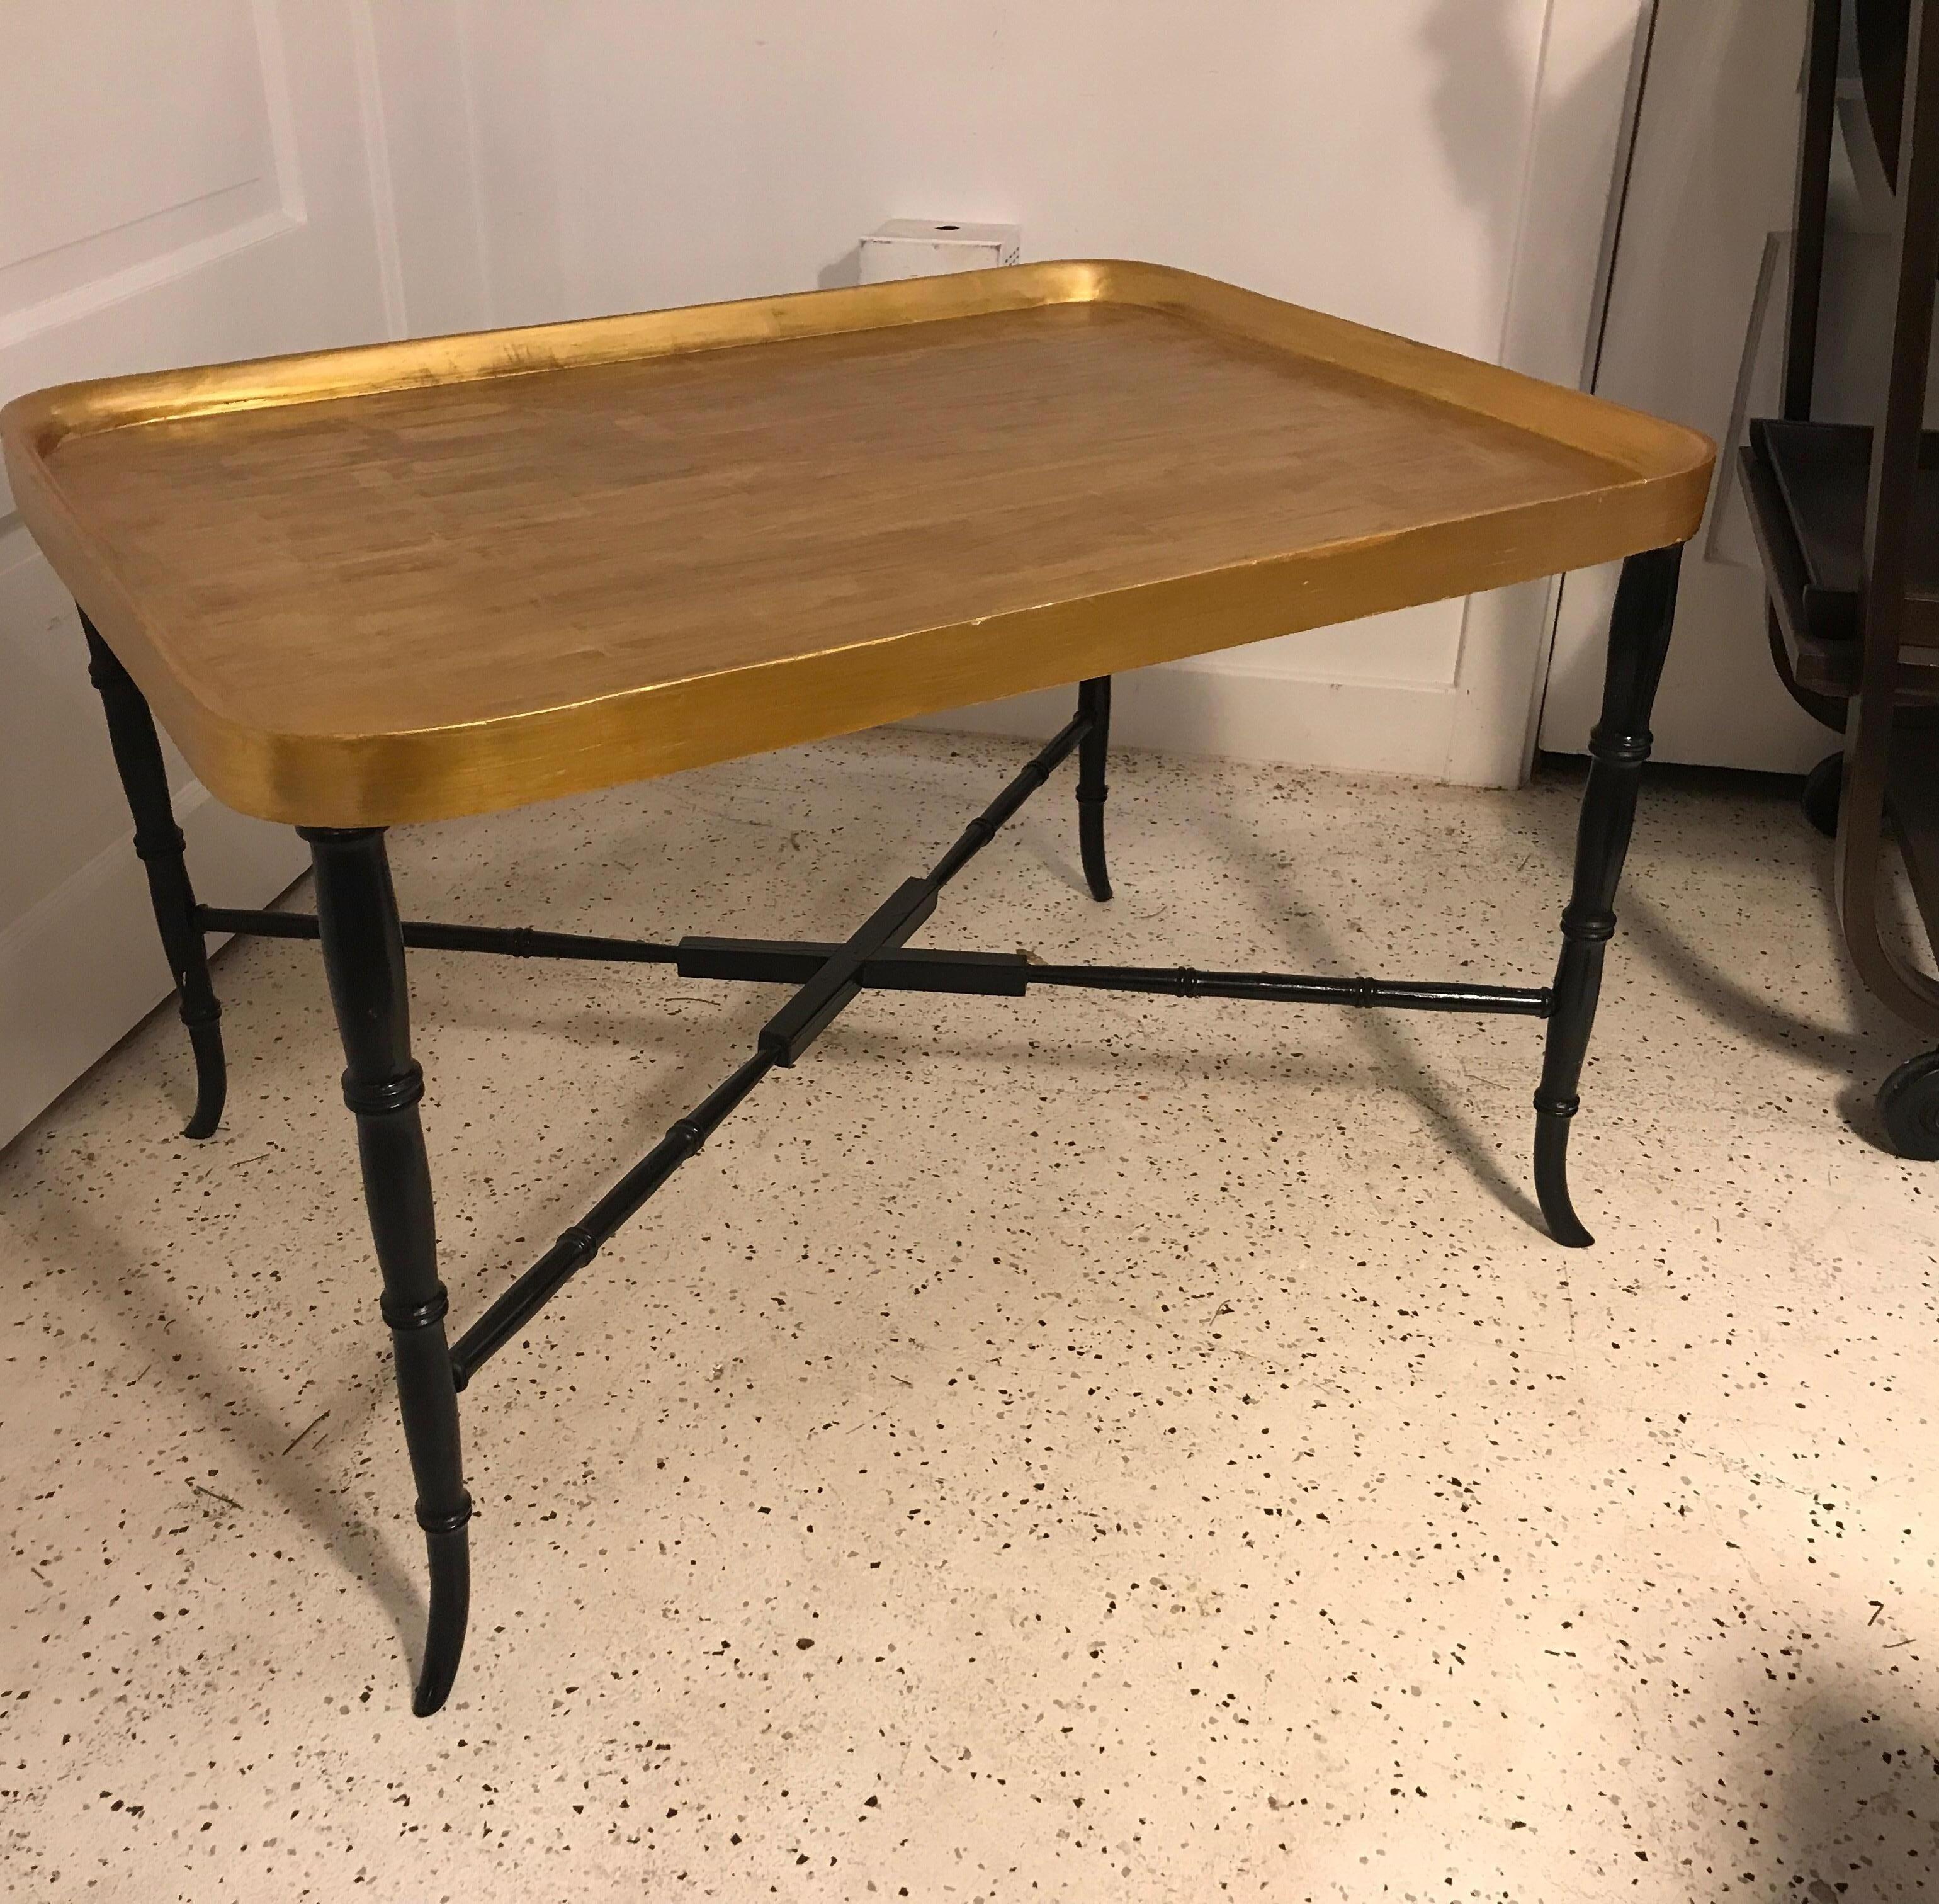 Elegant gilt topped tray style table with ebonized legs. The tray top is attached and not removable. The base with faux bamboo style legs with stretcher base. Very chic and Classic design, Italy, 1960s.